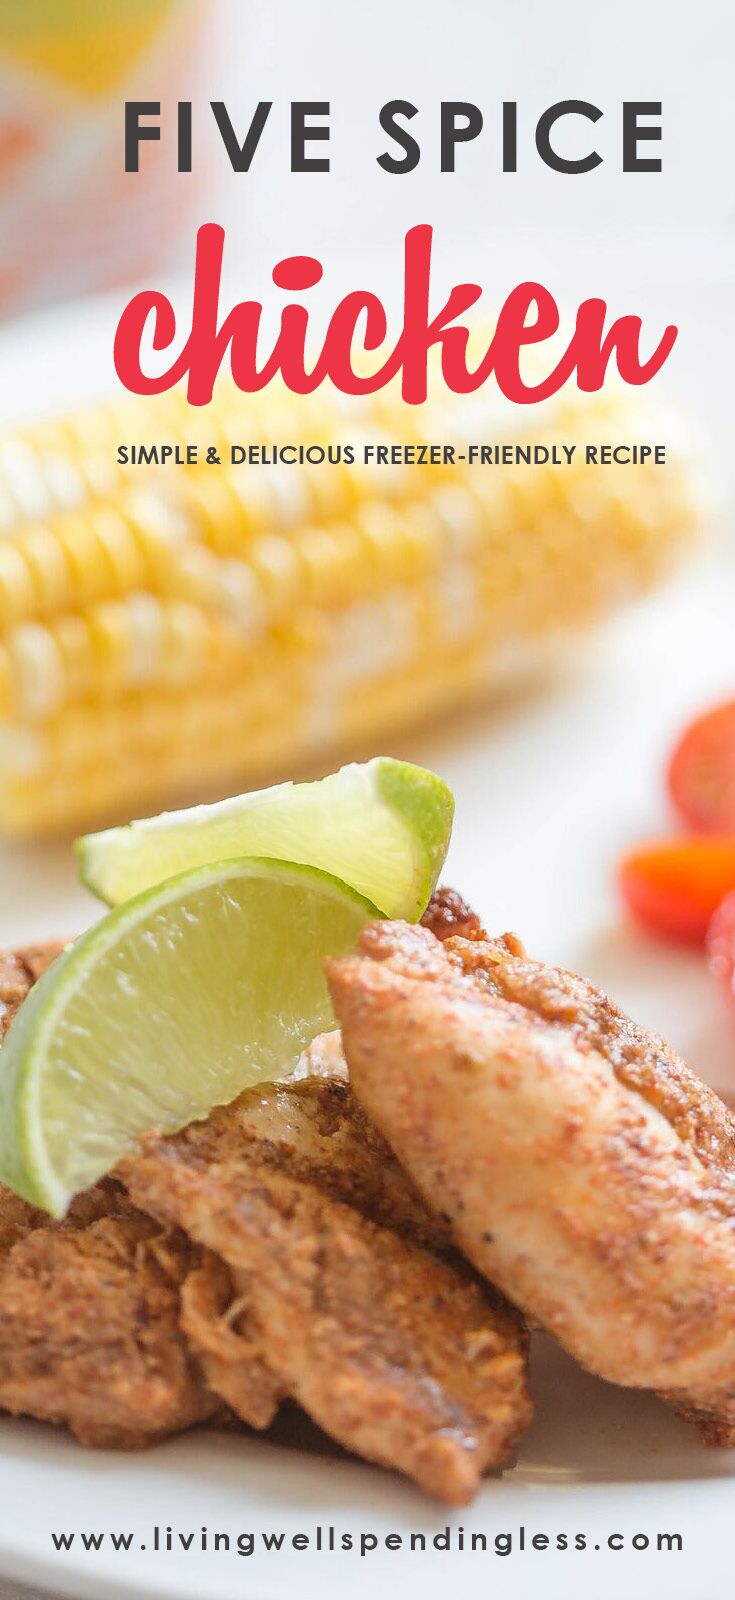 5 Spice Grilled Chicken | Simple Chicken Recipe | Food Made Simple | Freezer Friendly Recipe